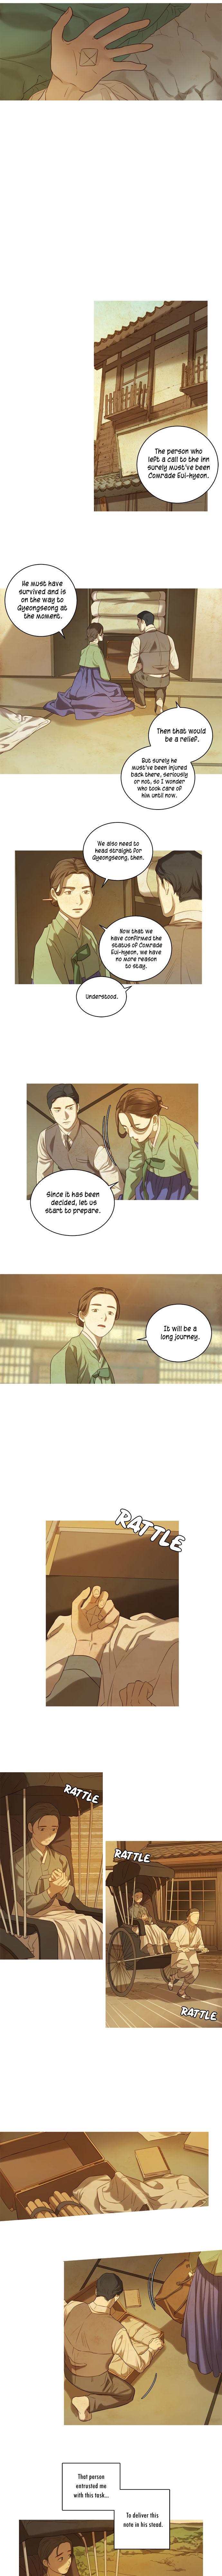 The Whale Star - The Gyeongseong Mermaid - Chapter 6 Page 9